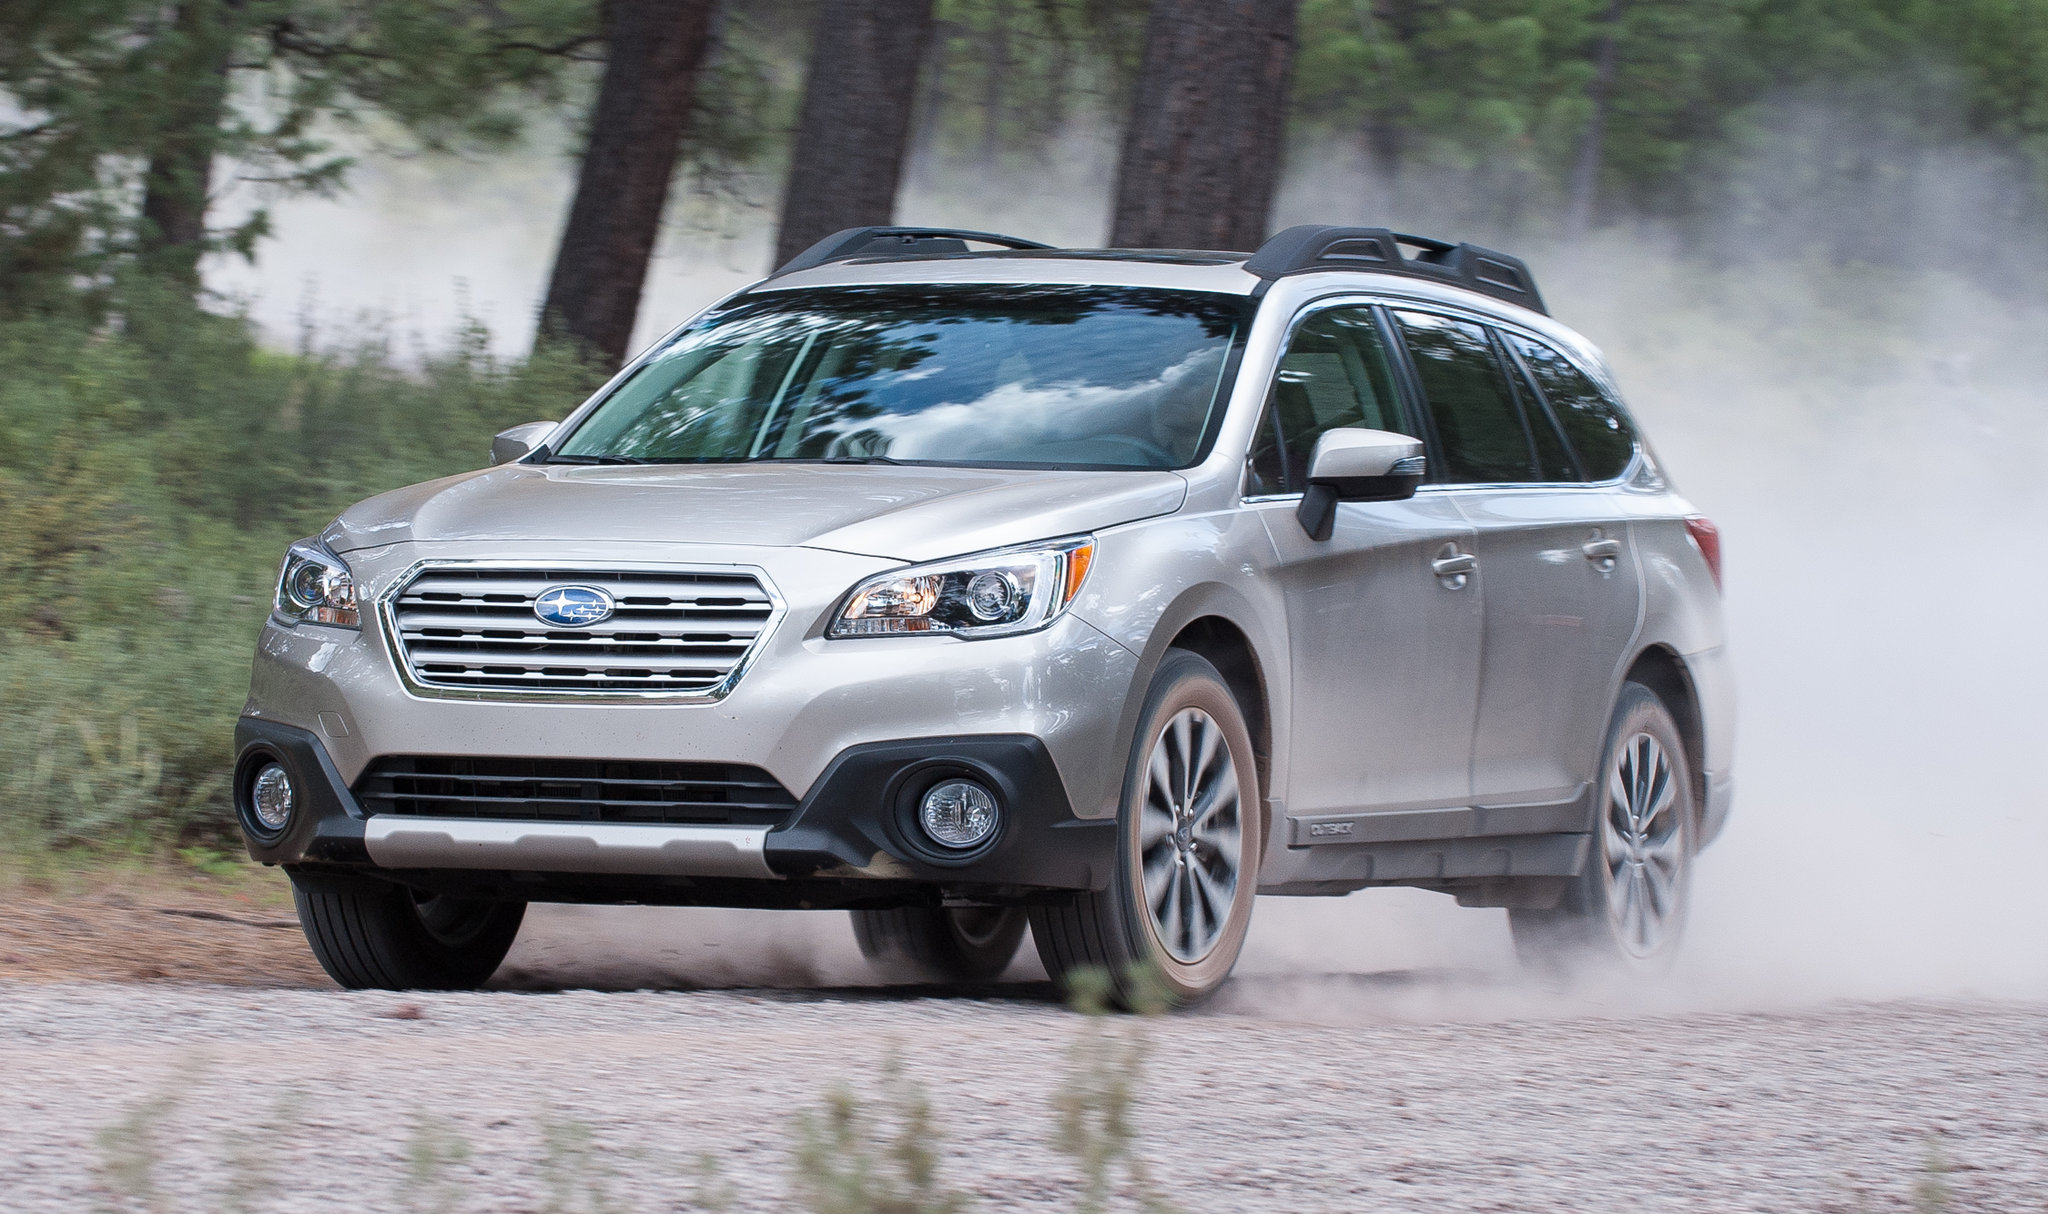 2015 Subaru Outback Review - The New York Times